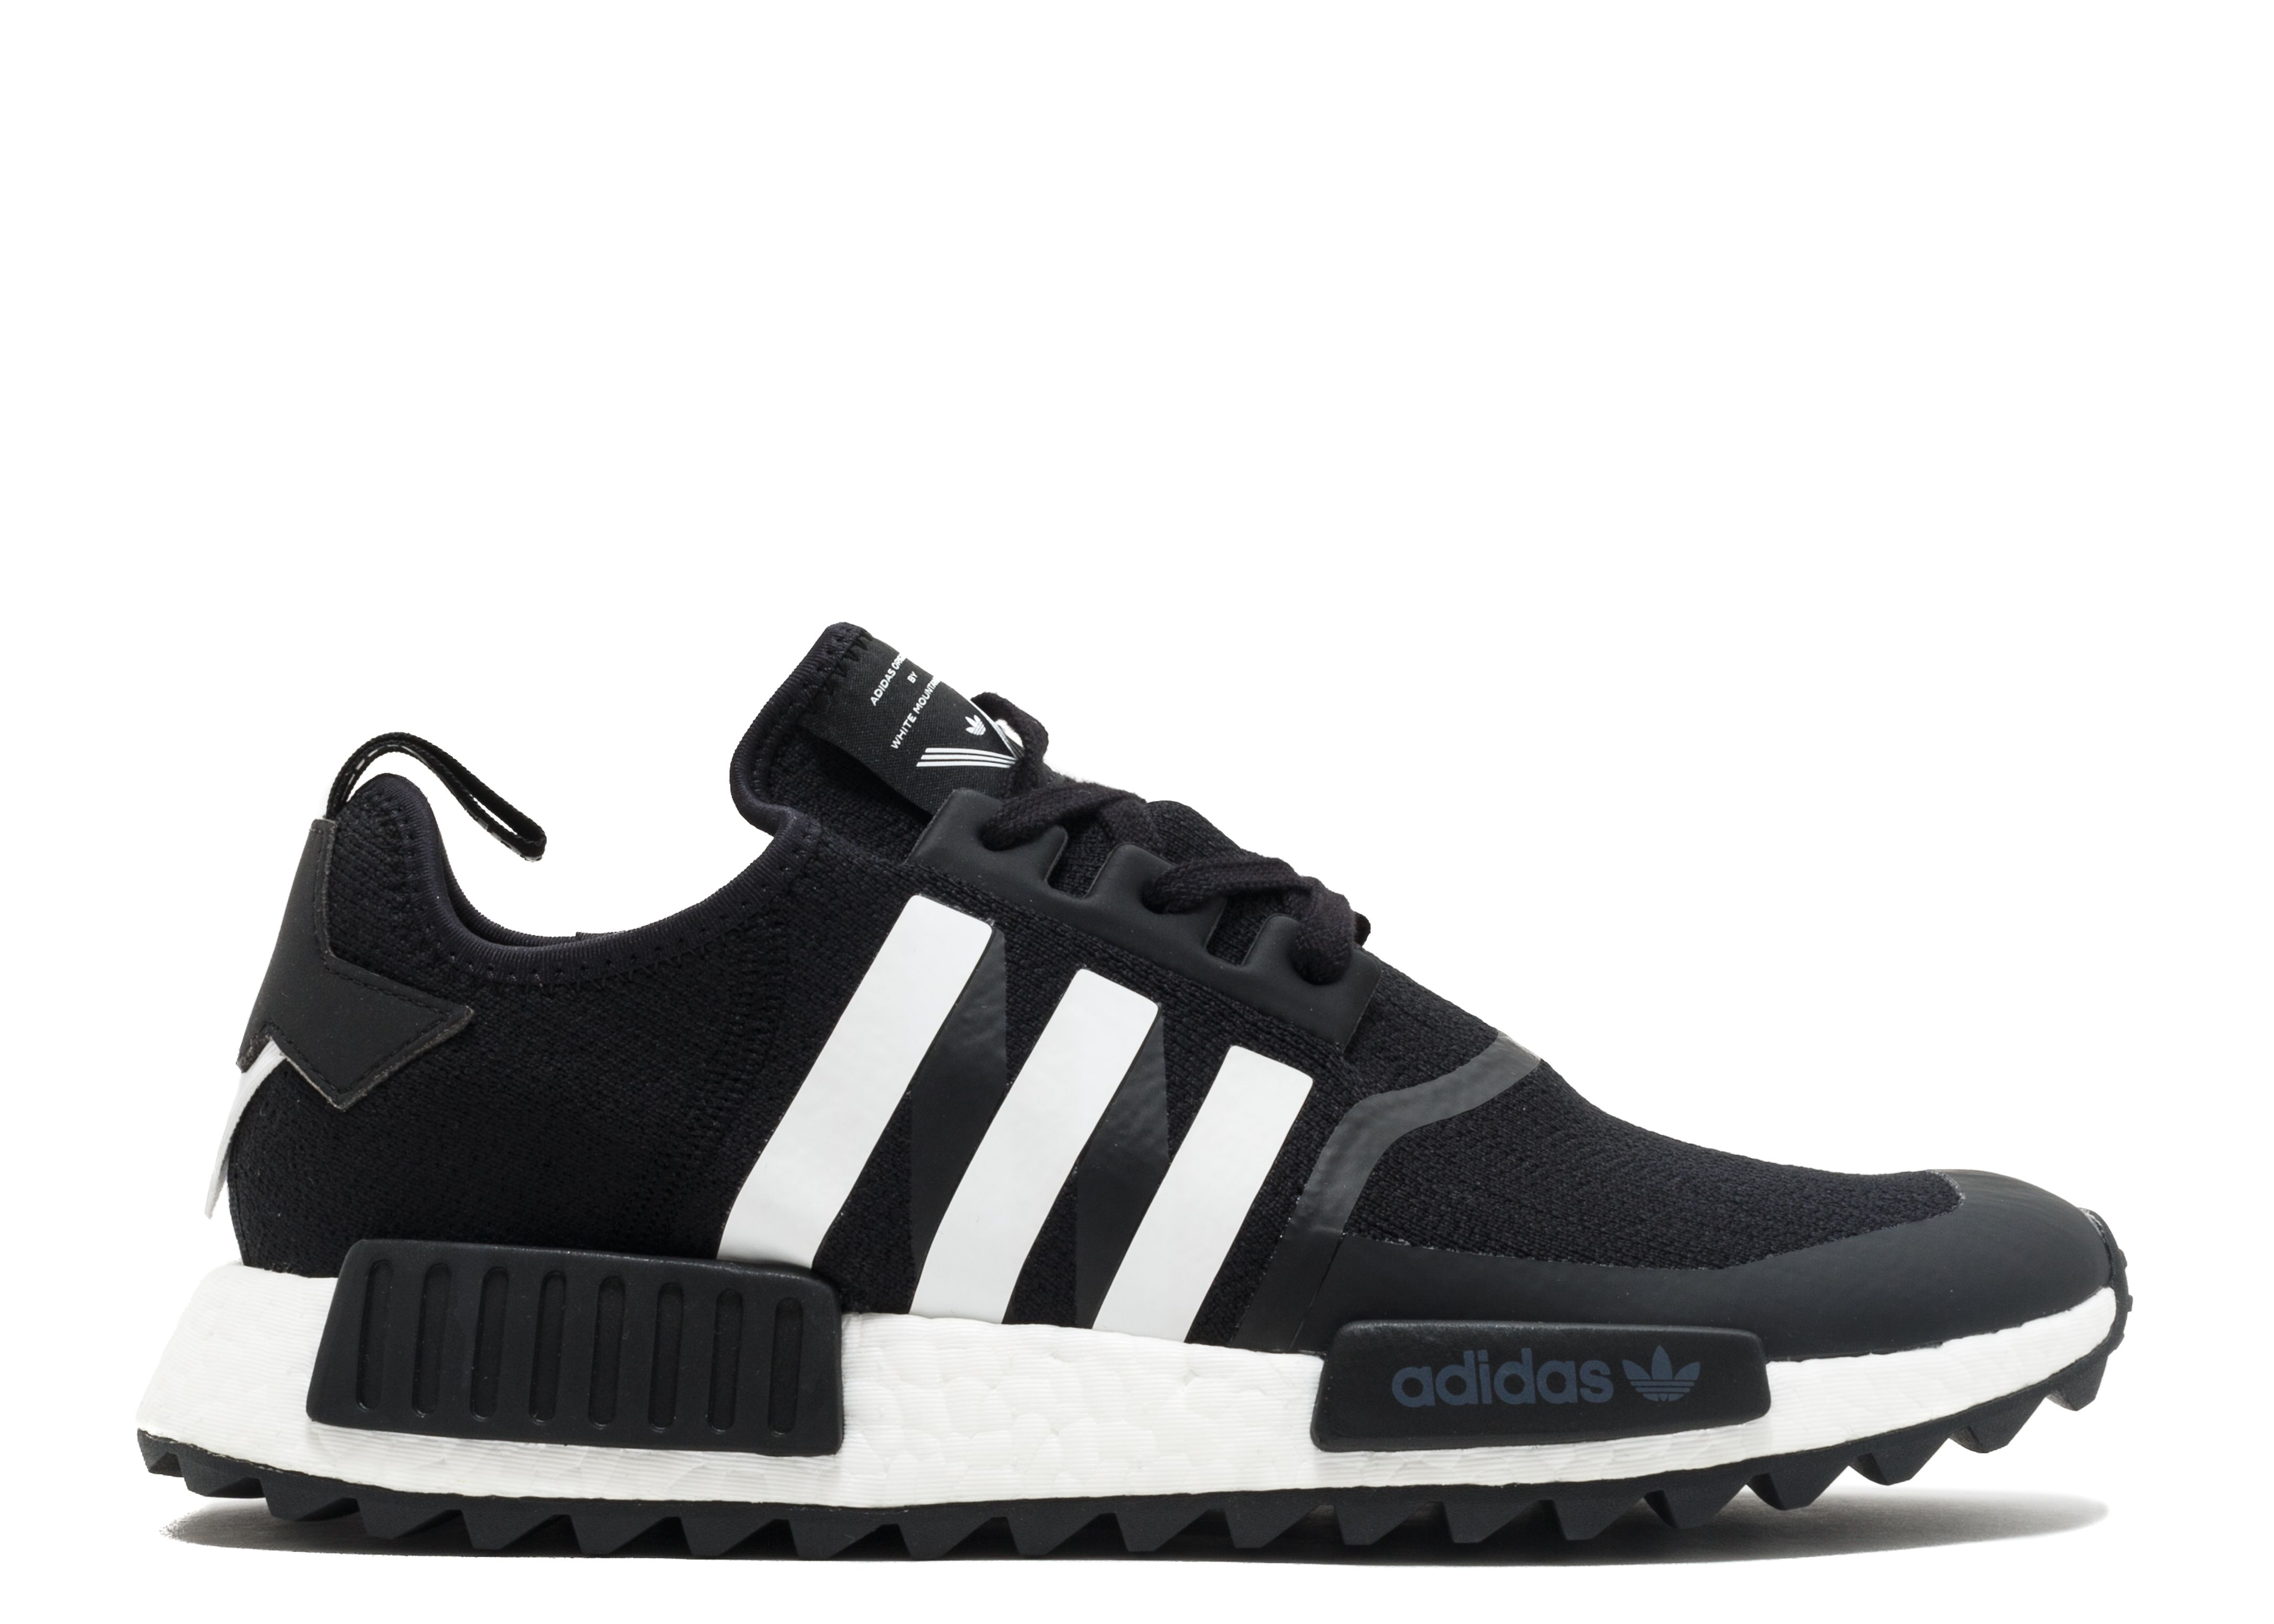 white mountaineering nmd